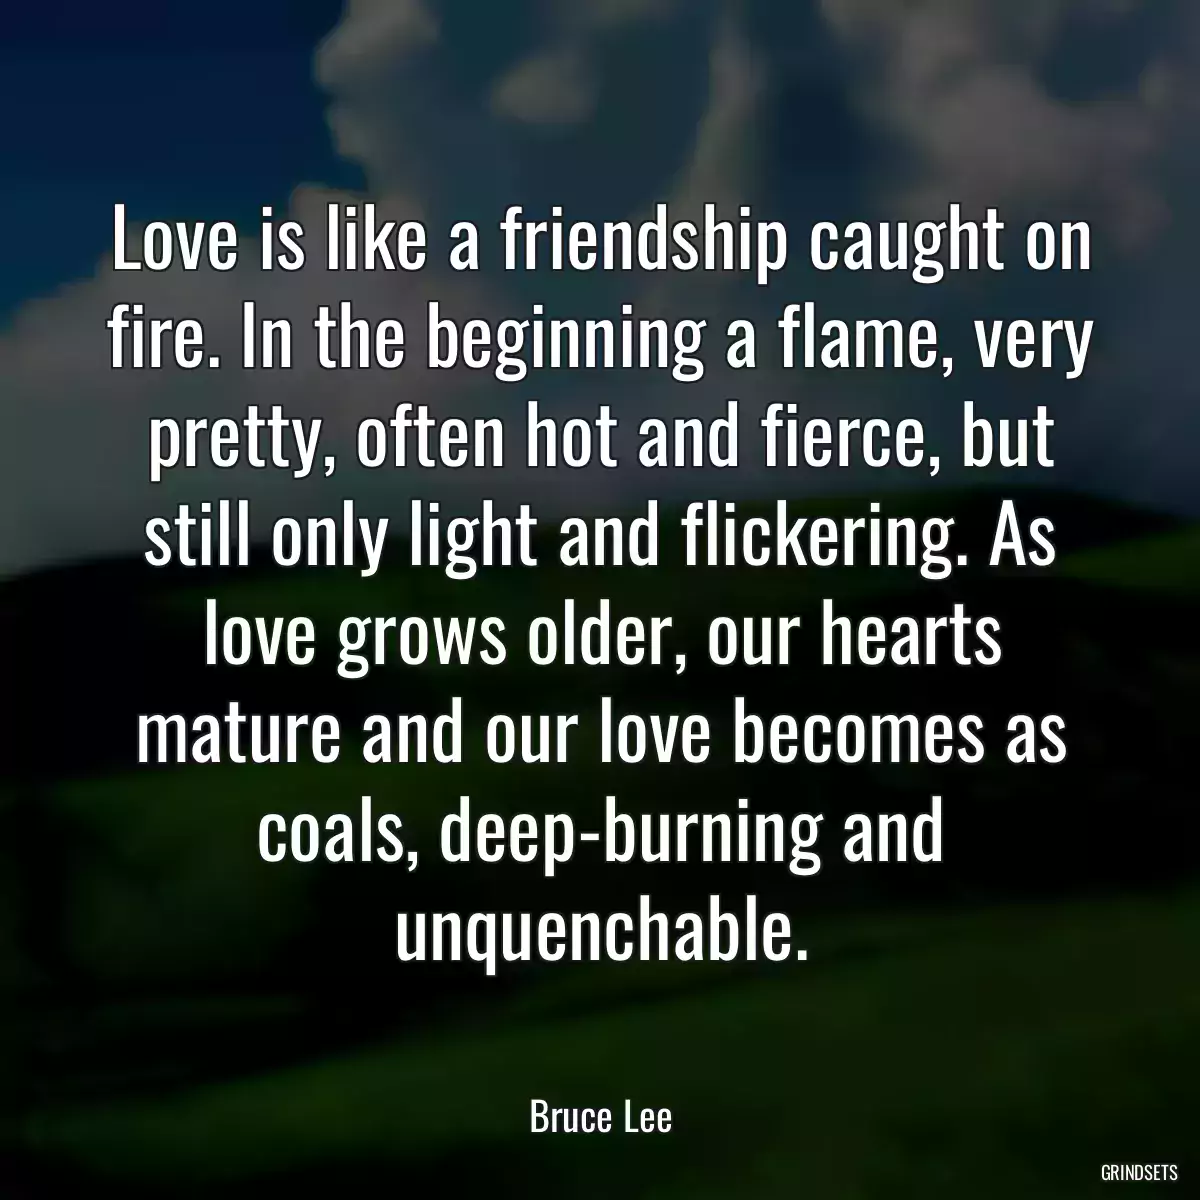 Love is like a friendship caught on fire. In the beginning a flame, very pretty, often hot and fierce, but still only light and flickering. As love grows older, our hearts mature and our love becomes as coals, deep-burning and unquenchable.